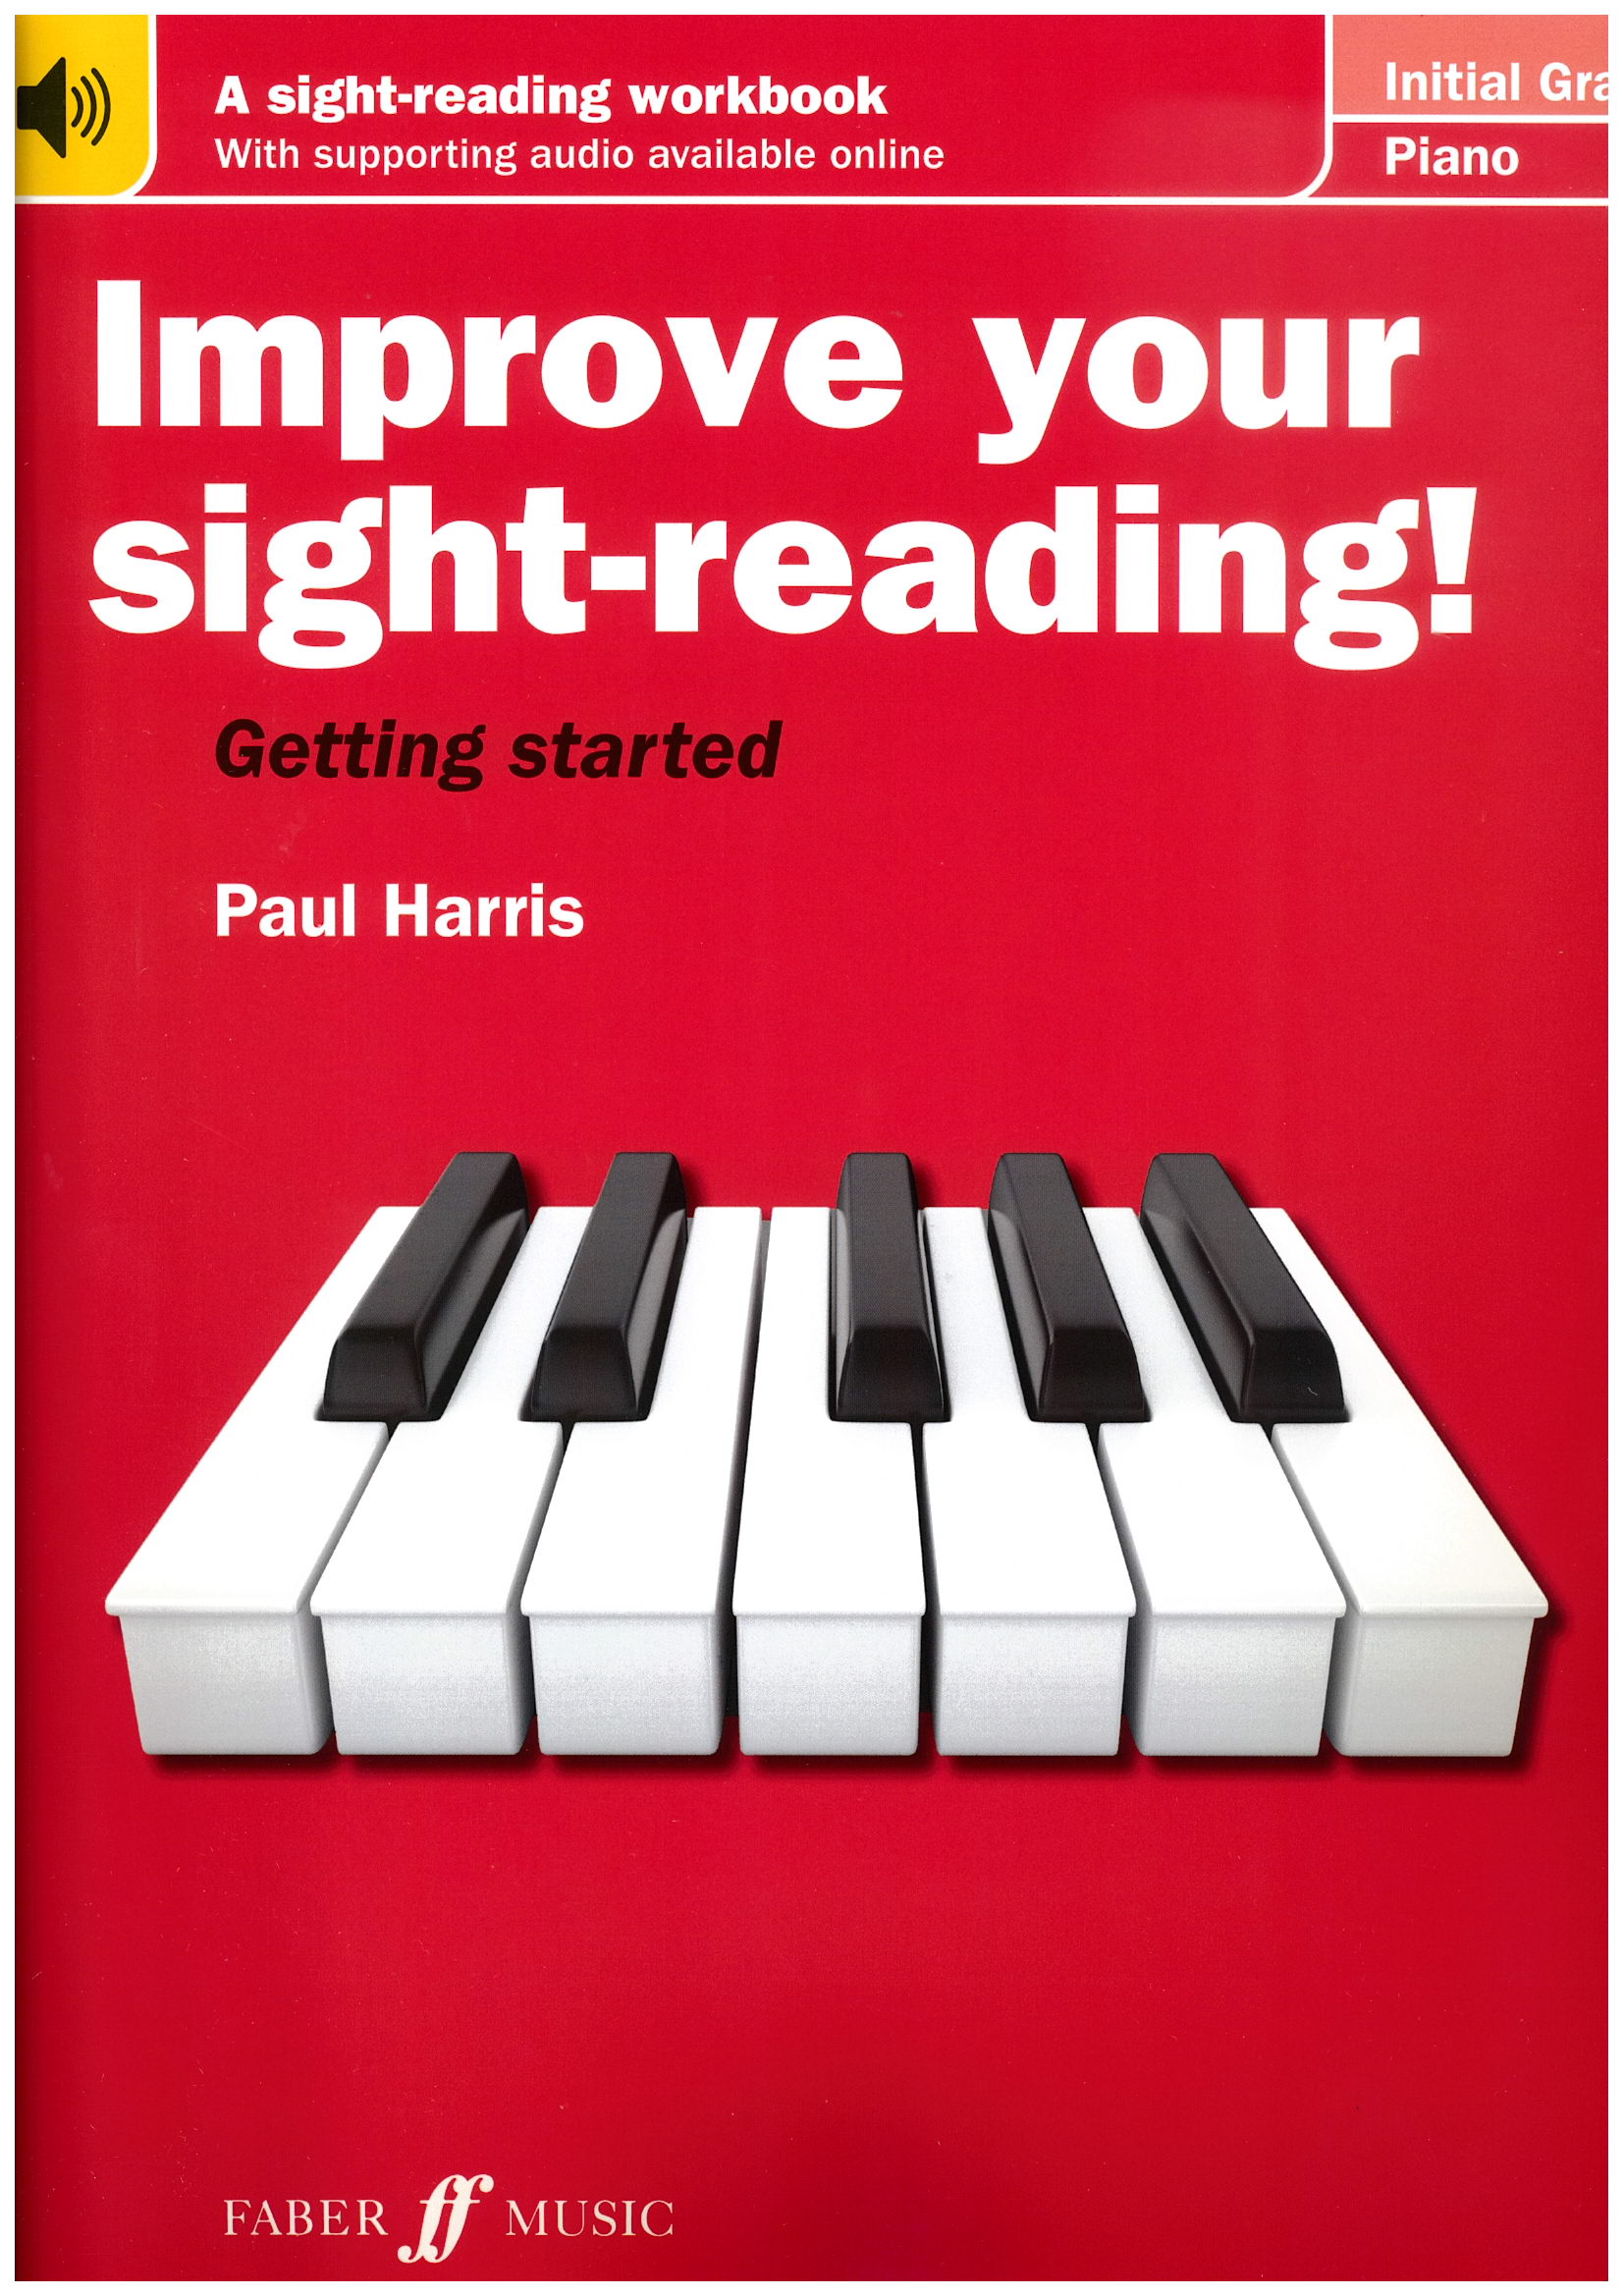 Improve your sight-reading for piano Initial Grade